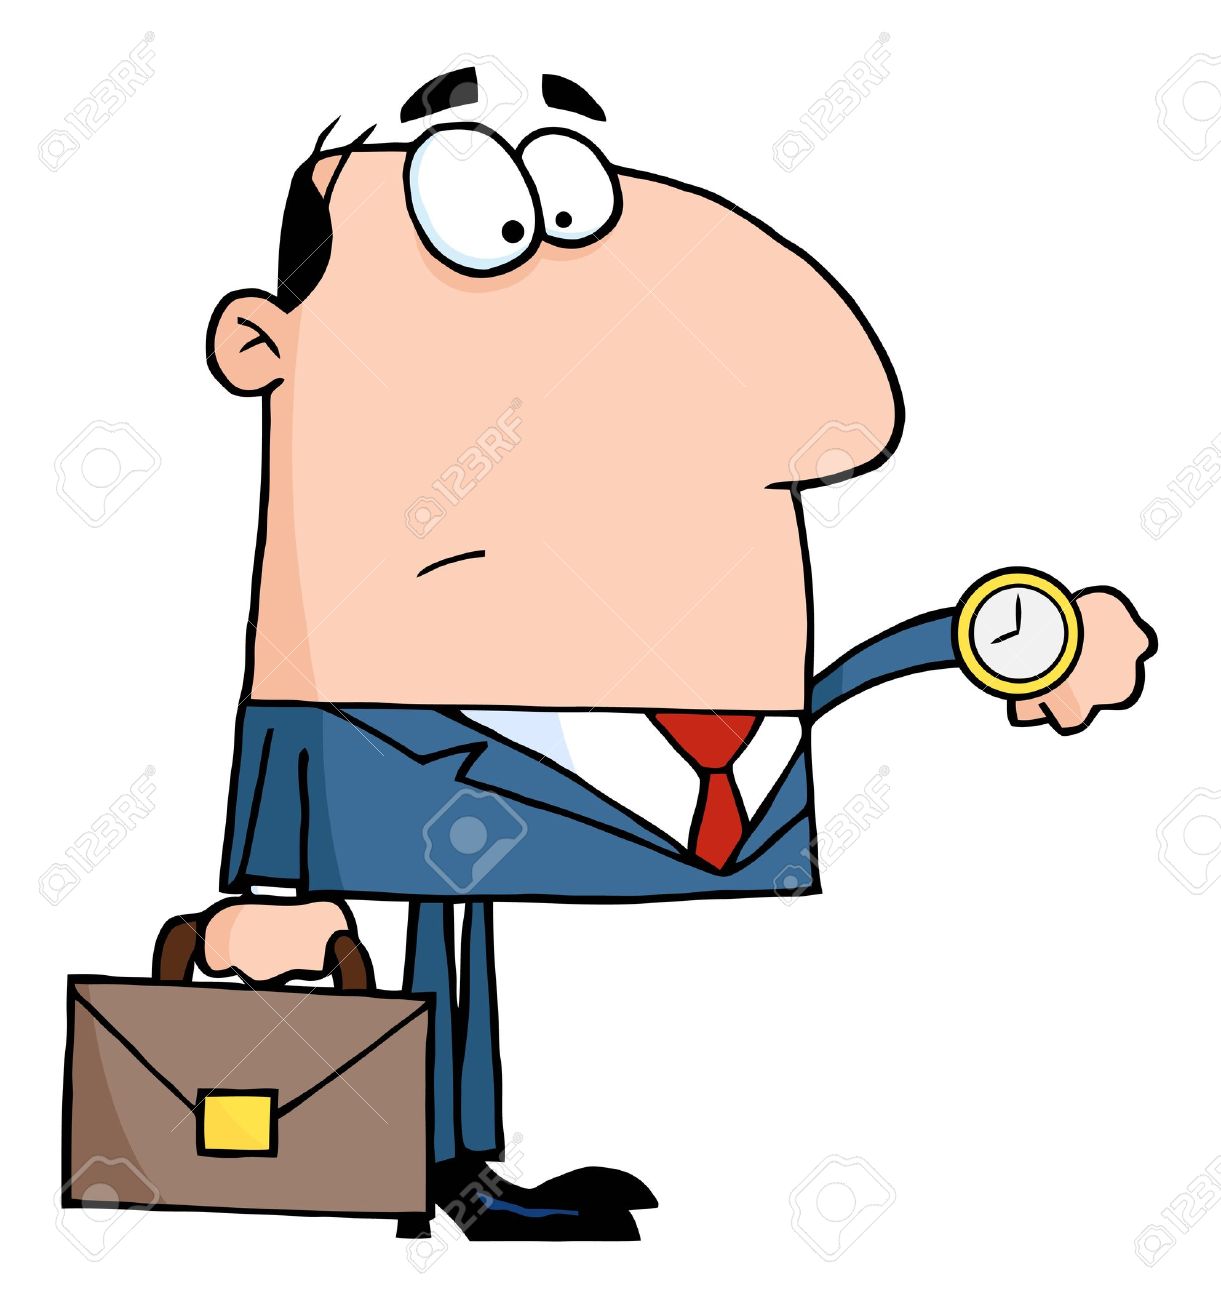 Waiting With Clock Clipart.